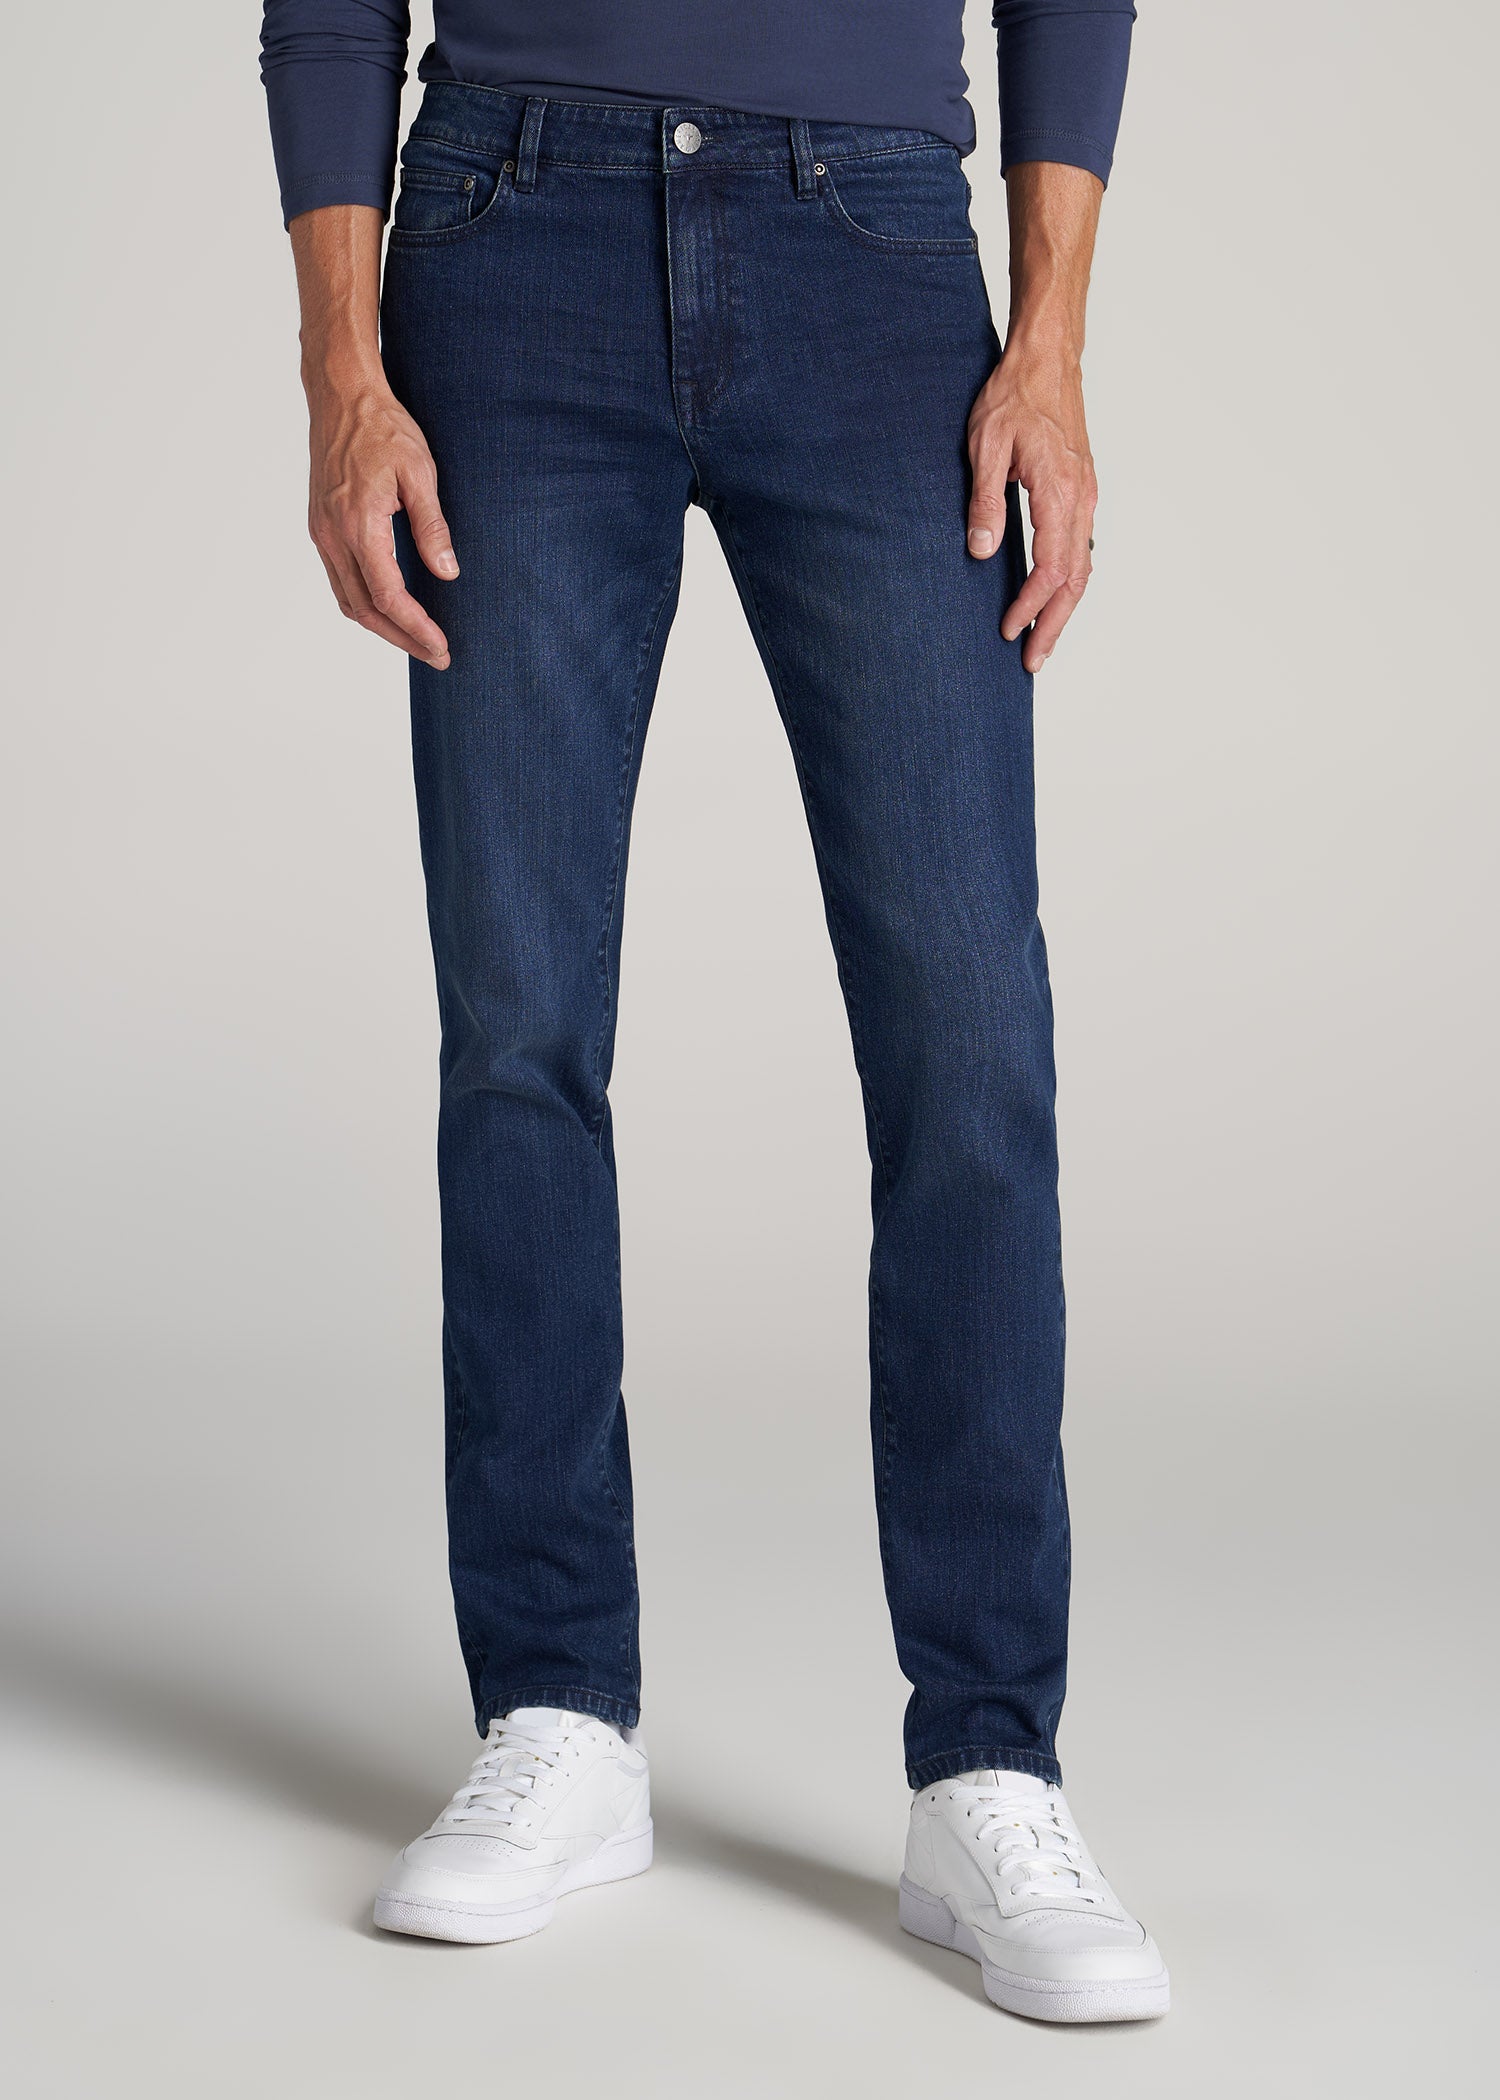 Tall Jeans Mens: Dylan Slim Fit Jeans New Fade For Tall Men